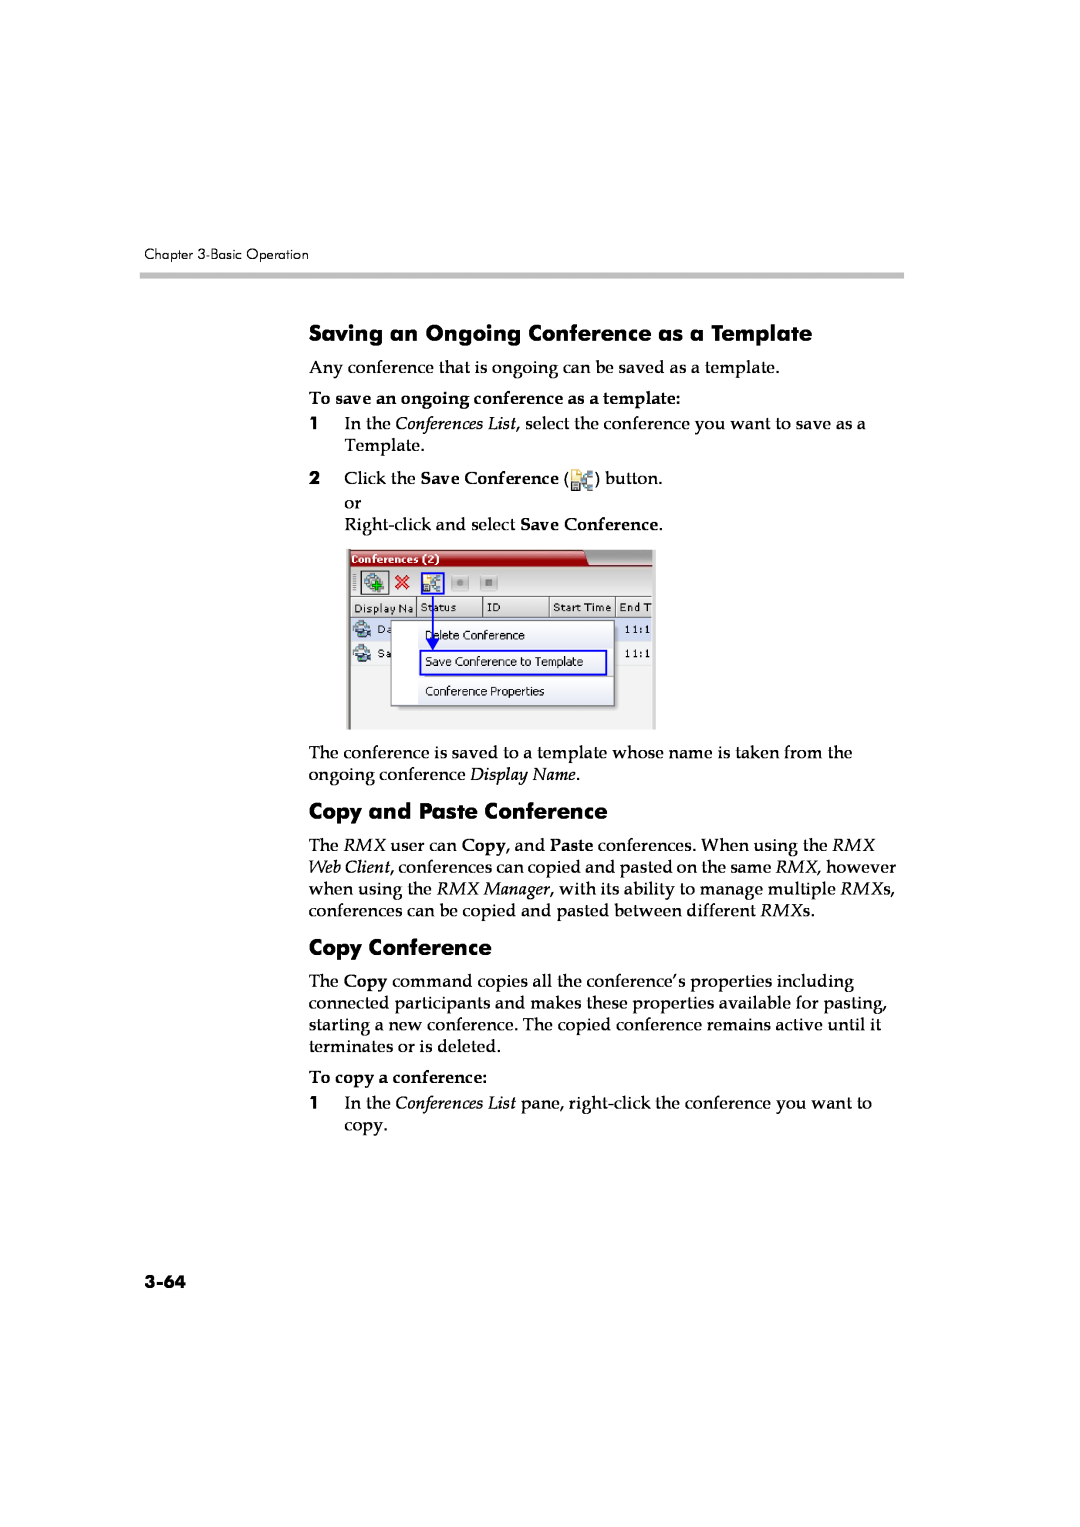 Polycom DOC2560A manual Saving an Ongoing Conference as a Template, Copy and Paste Conference, Copy Conference, 3-64 